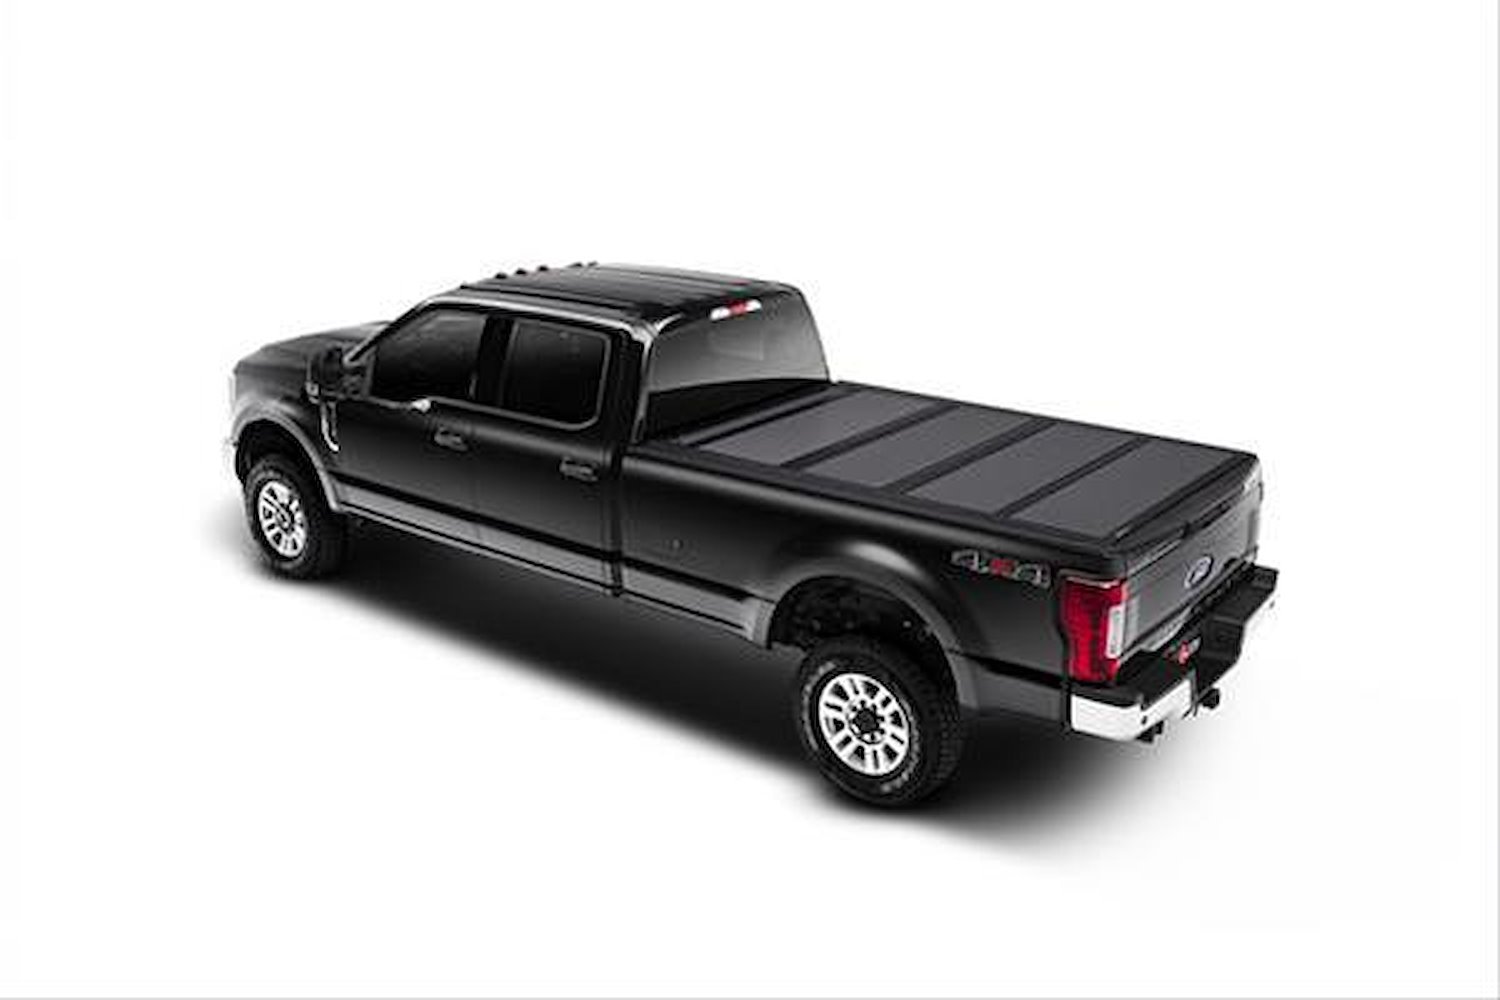 448331 BAKFlip MX4 for Fits Select Ford Super-Duty 8.2 ft. Bed, Hard Folding Cover Style [Black Finish]